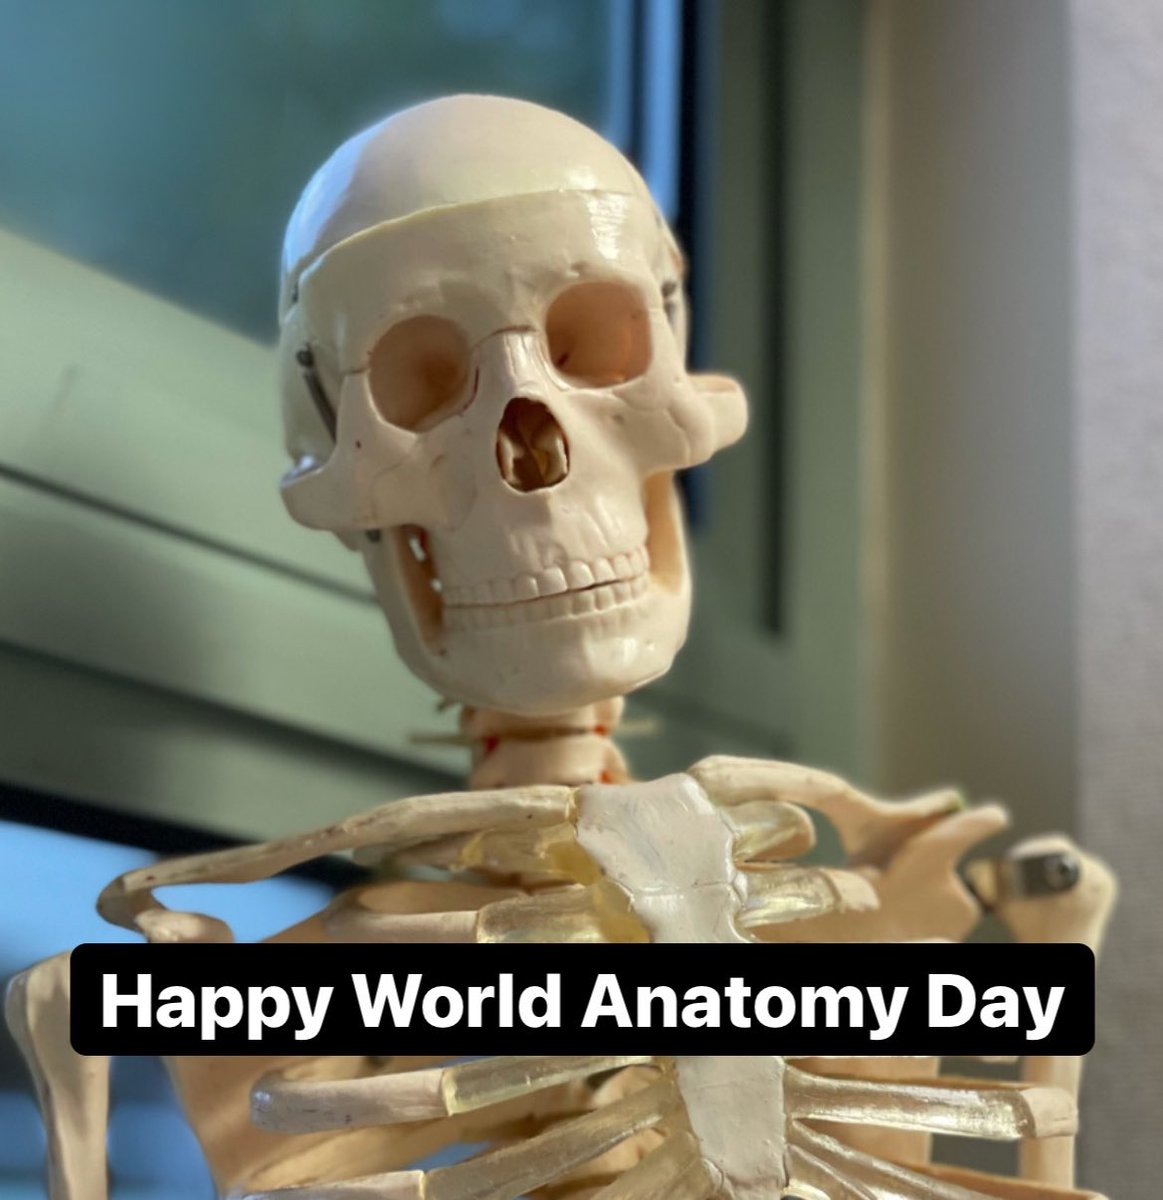 Happy #WorldAnatomyDay from all the team at the School of Anatomy! Check out our Instagram story to hear some of our favourite anatomy facts and stories #anatomy #anatomyfacts #celebratinganatomy